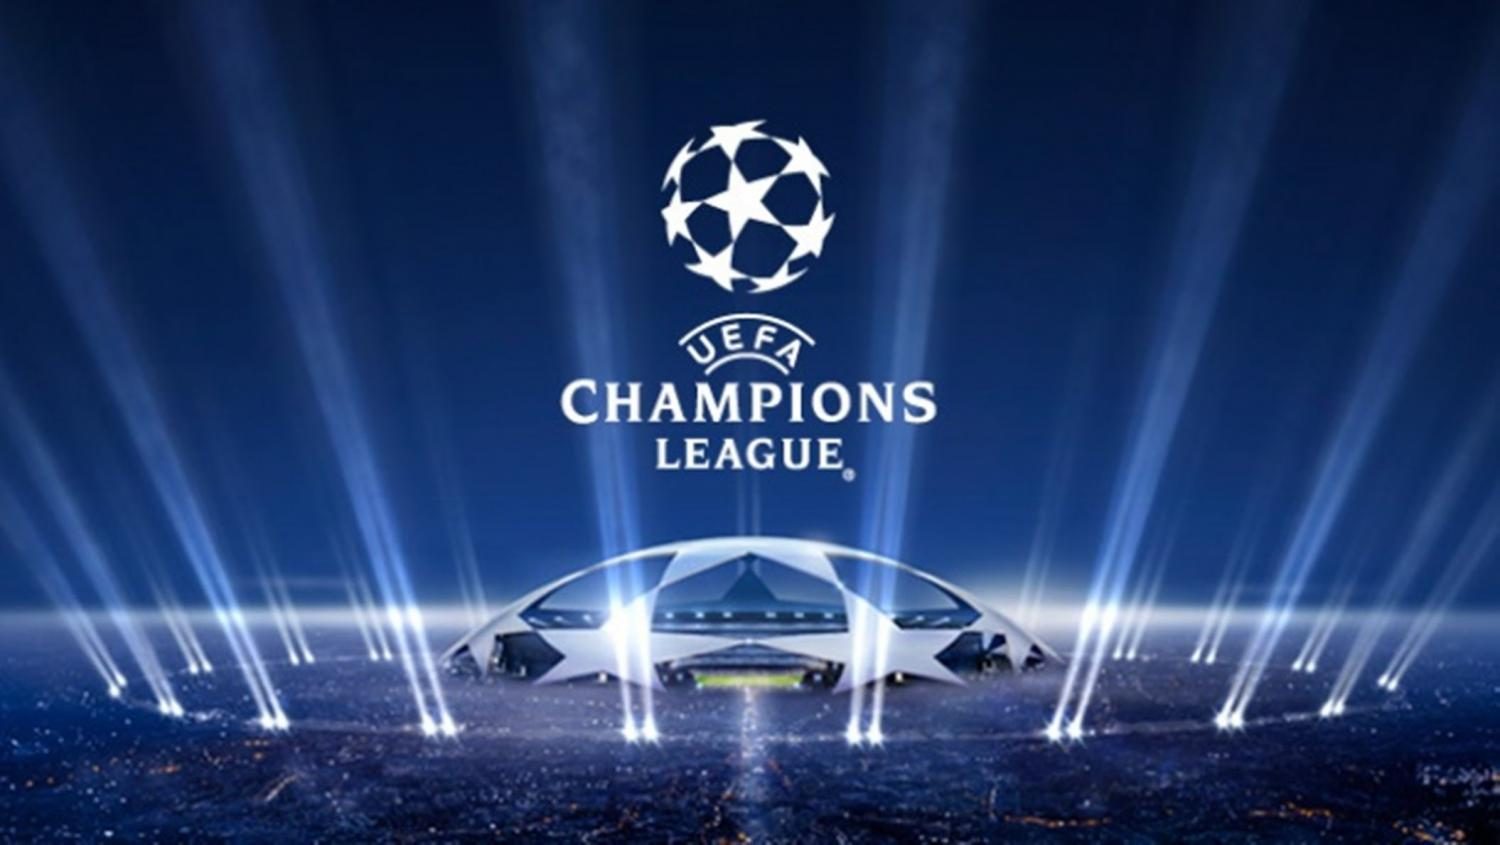 Who will win the UEFA Champions League?